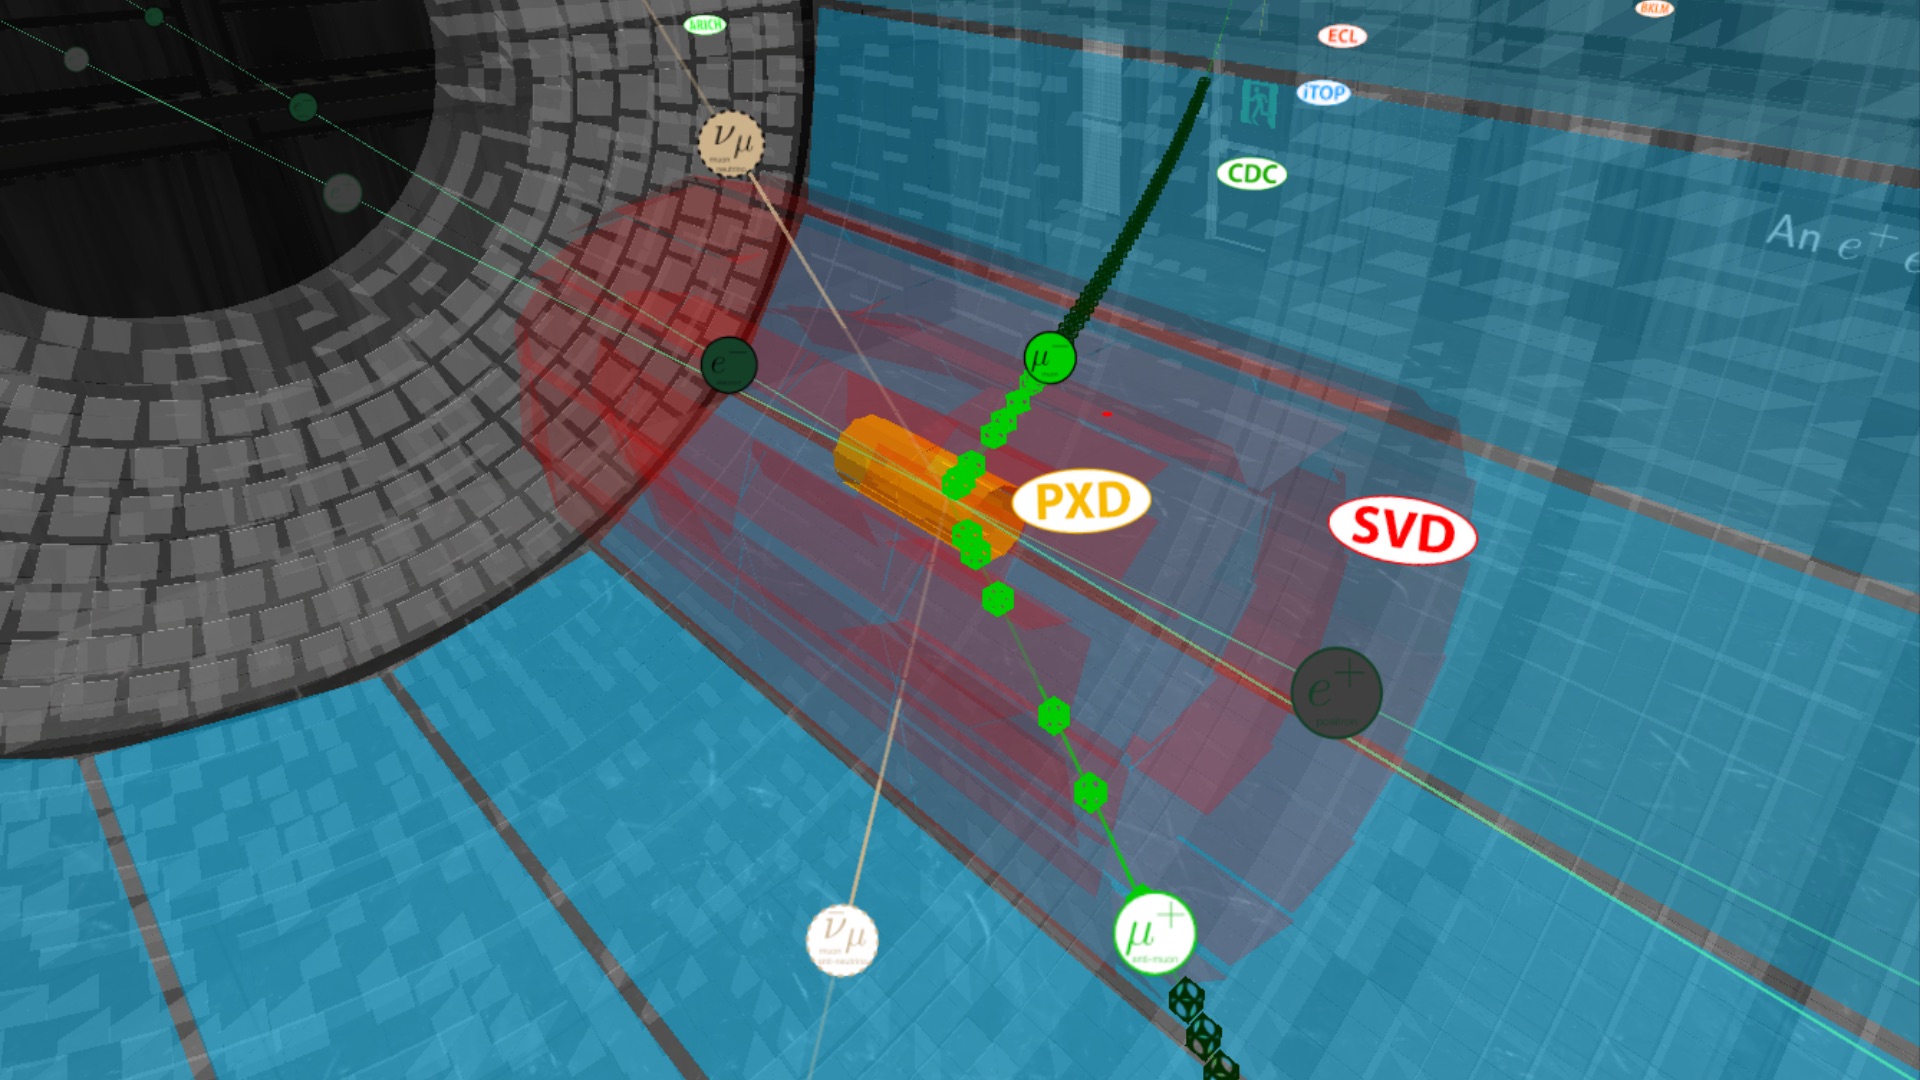 Figure 1. A computer graphics image of a simulated event in which a Z' boson is produced by e<sup>+</sup>e<sup>-</sup> collisions, in association with two muons (green curves and hits) and decays into invisible particles. In this figure, the Z’ boson decays into an invisible neutrino and an anti-neutrino, but it may also decay into a dark matter particle and its anti-particle. In either case, no trace is left is in the detector. ／（C) KEK, Belle II, created using Belle II in Virtual Reality developed by Zachary Duer, Tanner Upthegrove, Leo Piilonen, George Glasson, W. Jesse Barber, Samantha Spytek, Christopher Dobson at the Virginia Tech Institute for Creativity, Arts and Technology, Virginia Tech Department of Physics, Virginia Tech School of Education.